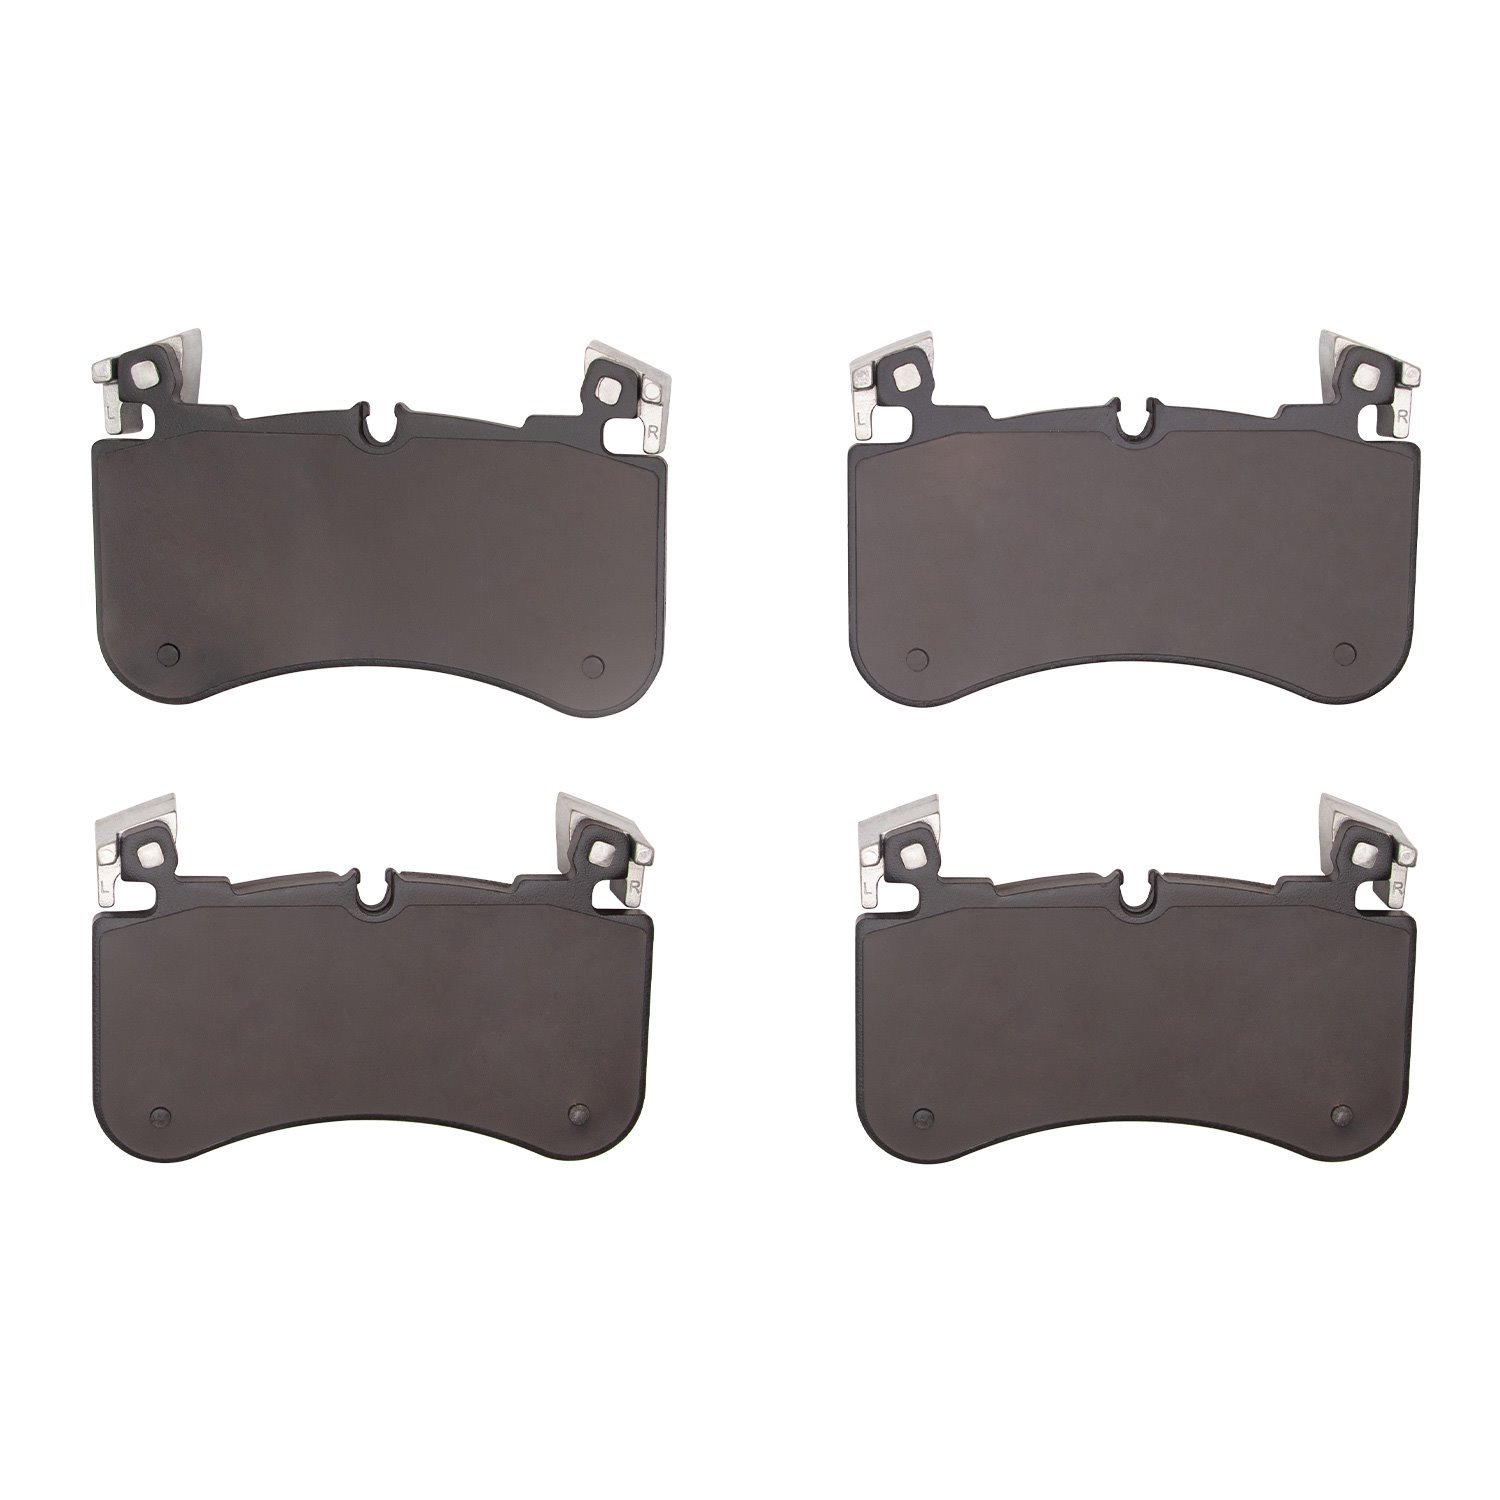 1551-2184-00 5000 Advanced Ceramic Brake Pads, Fits Select Land Rover, Position: Front